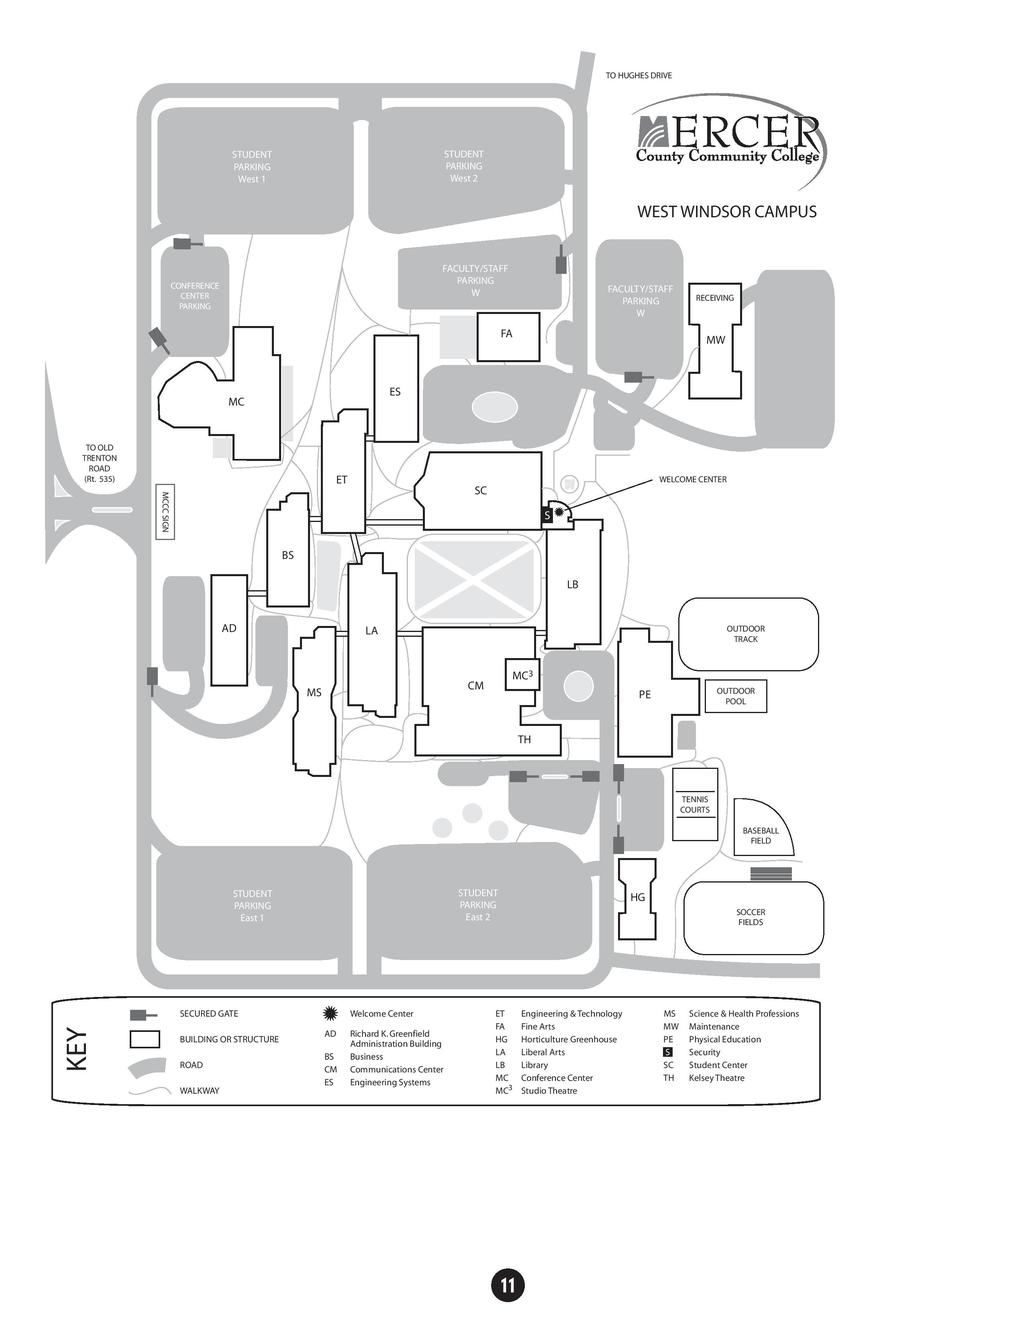 MCCC Location Map MCCC Campus Map Directions to MCCC are found at